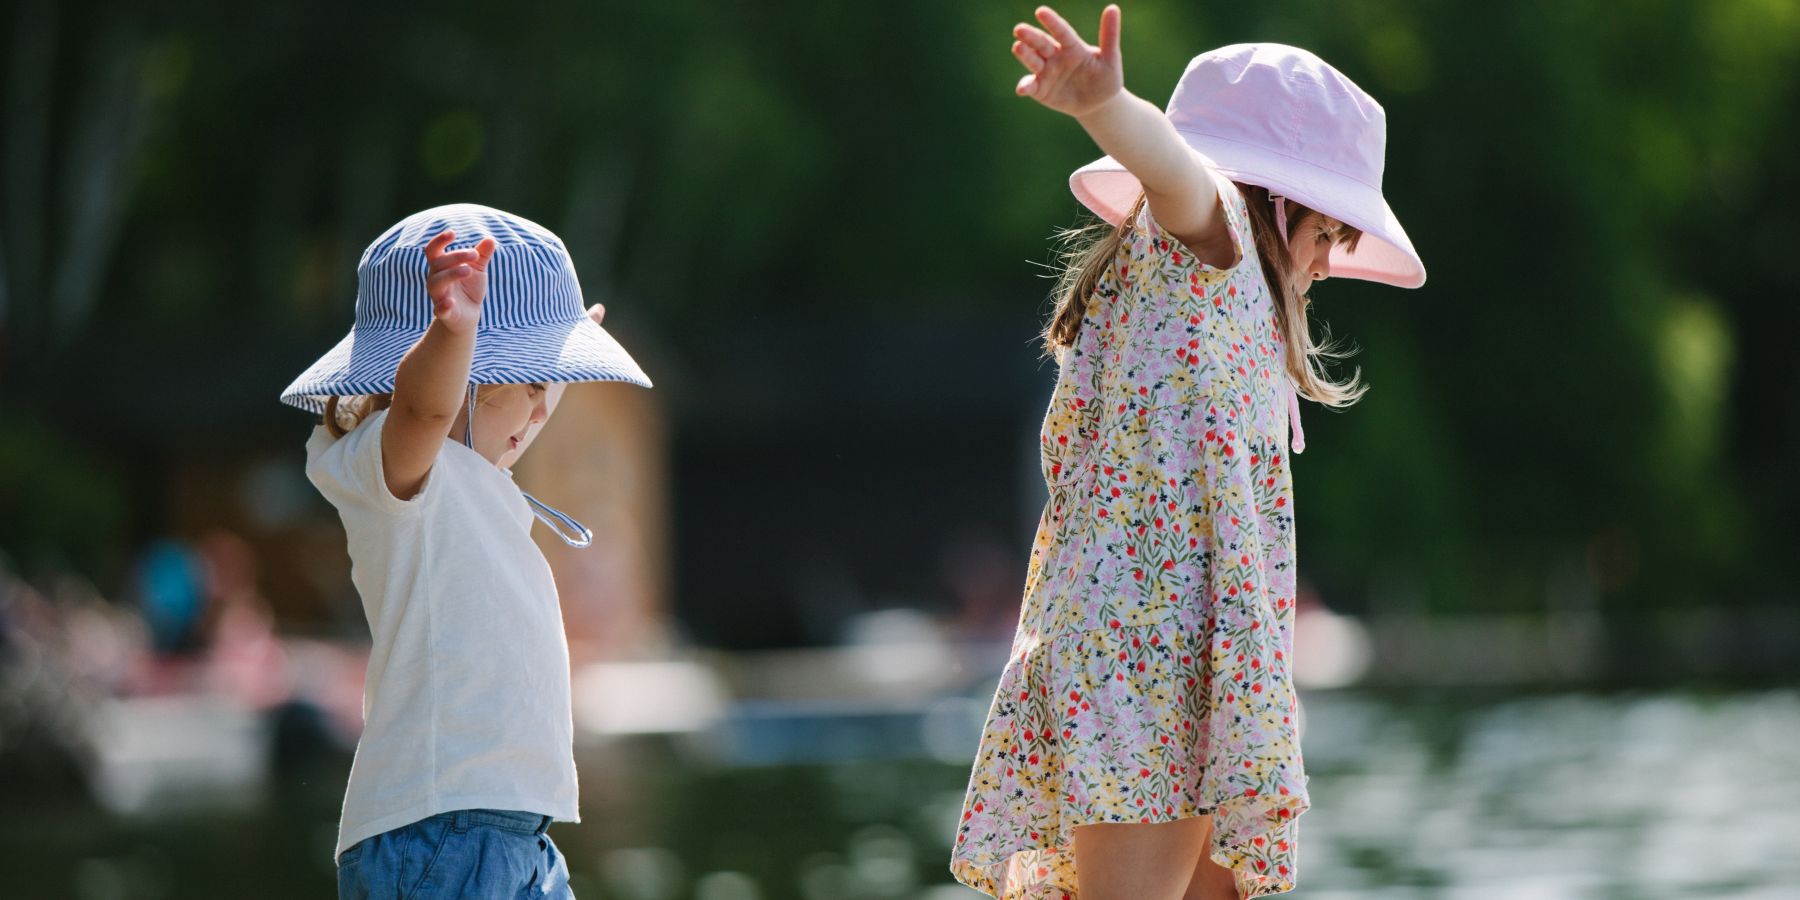 wide brim kids summer hats with UPF50+ Excellent Sun Protection for infants, toddlers and kids. linen, organic cotton, solar nylon with chin ties.  machine washable-made in canada by puffin gear,  hats your kids will love to wear